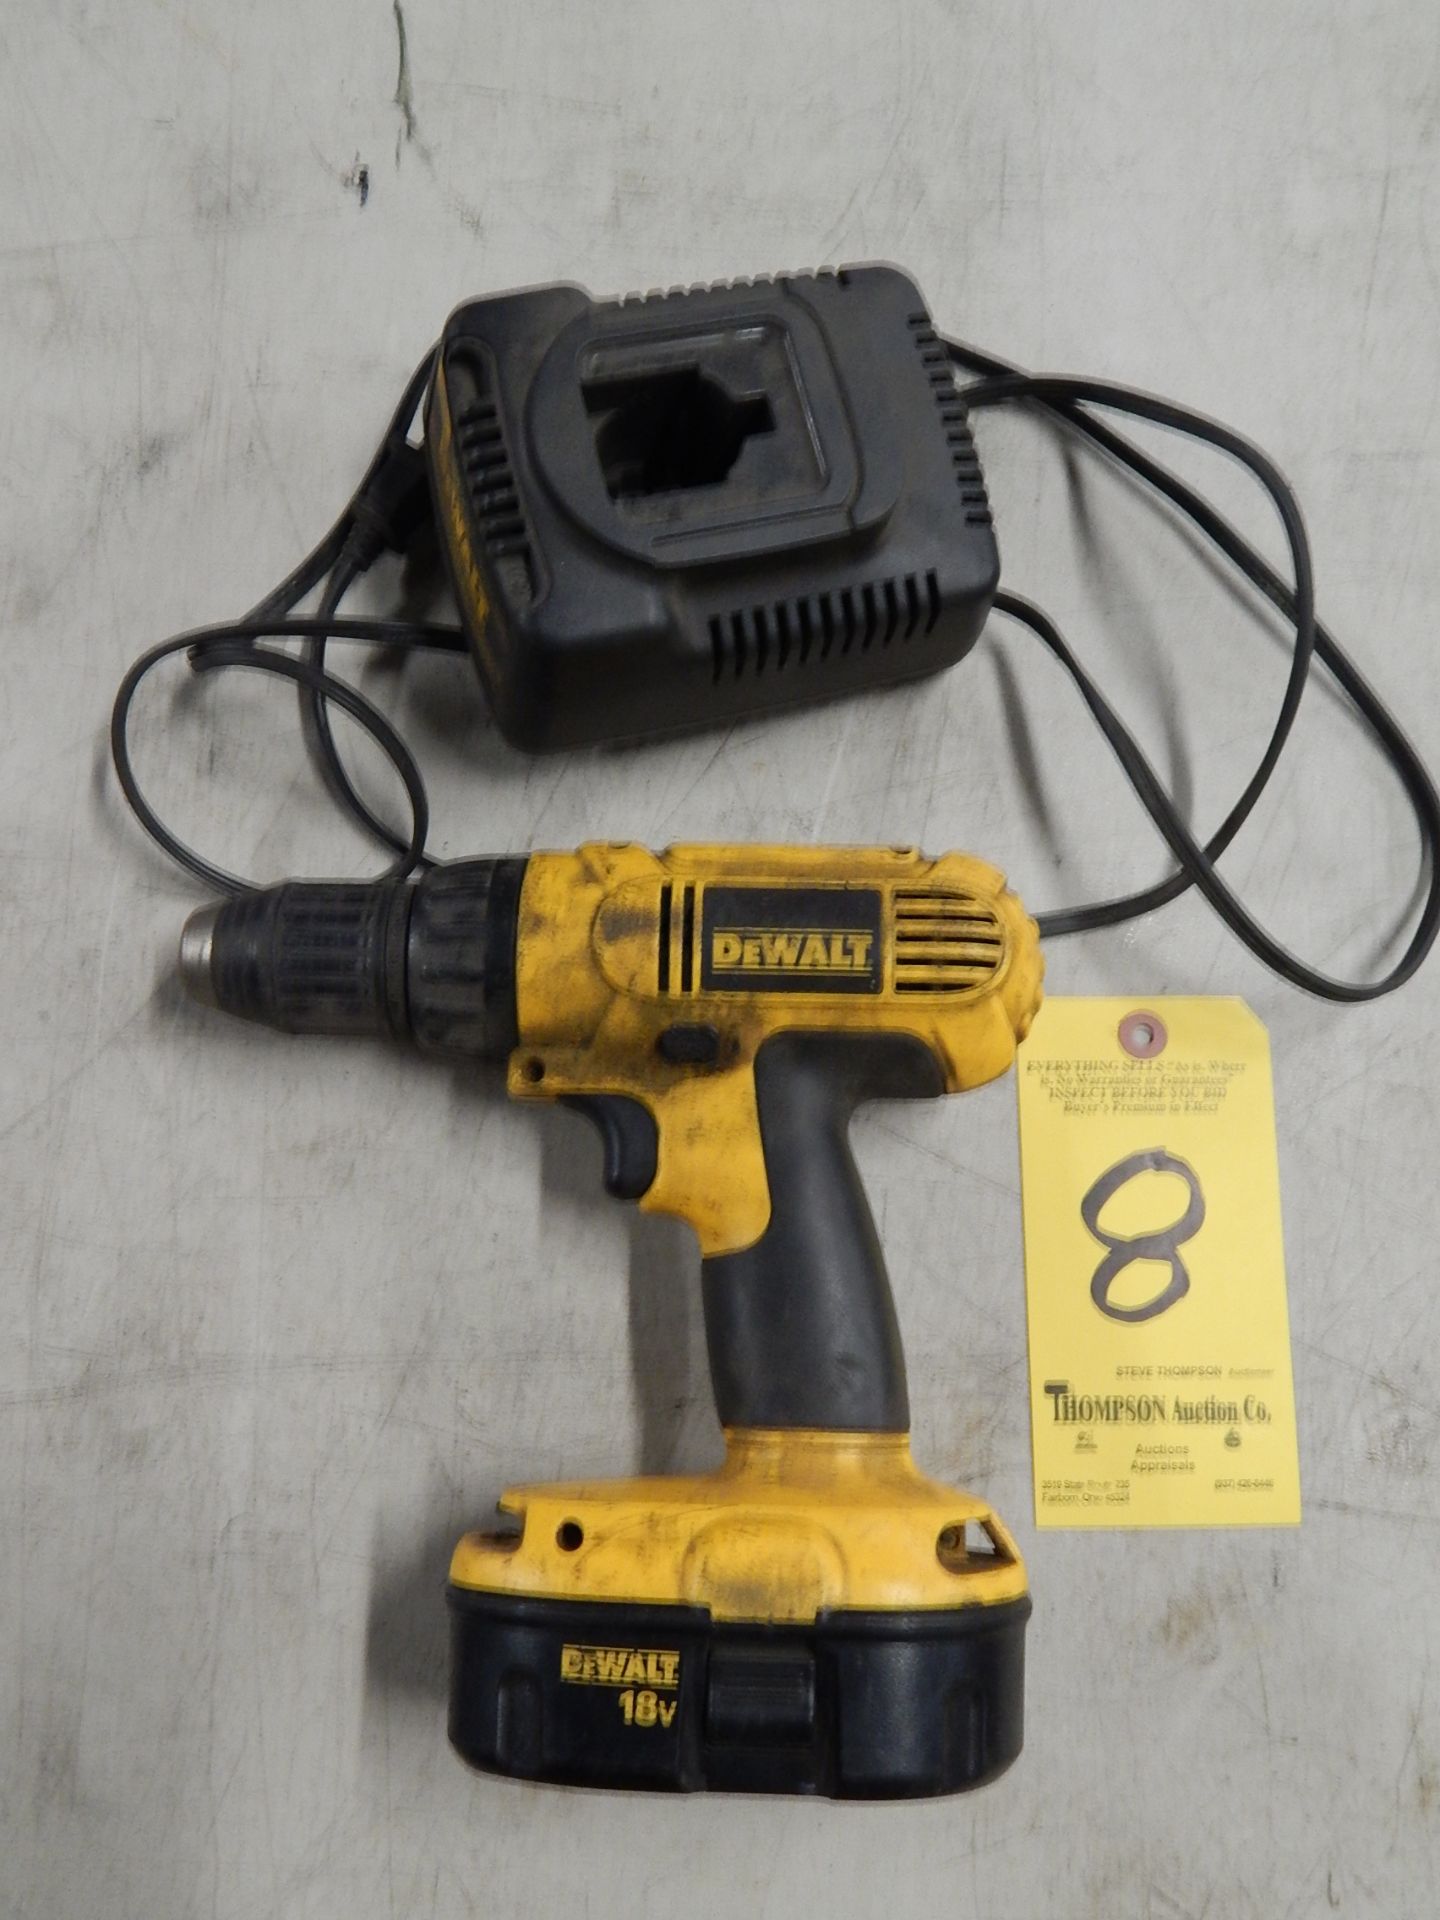 Dewalt 1/2" Drill, 18 Volt Rechargeable, Model DC970, with Battery and Charging Station